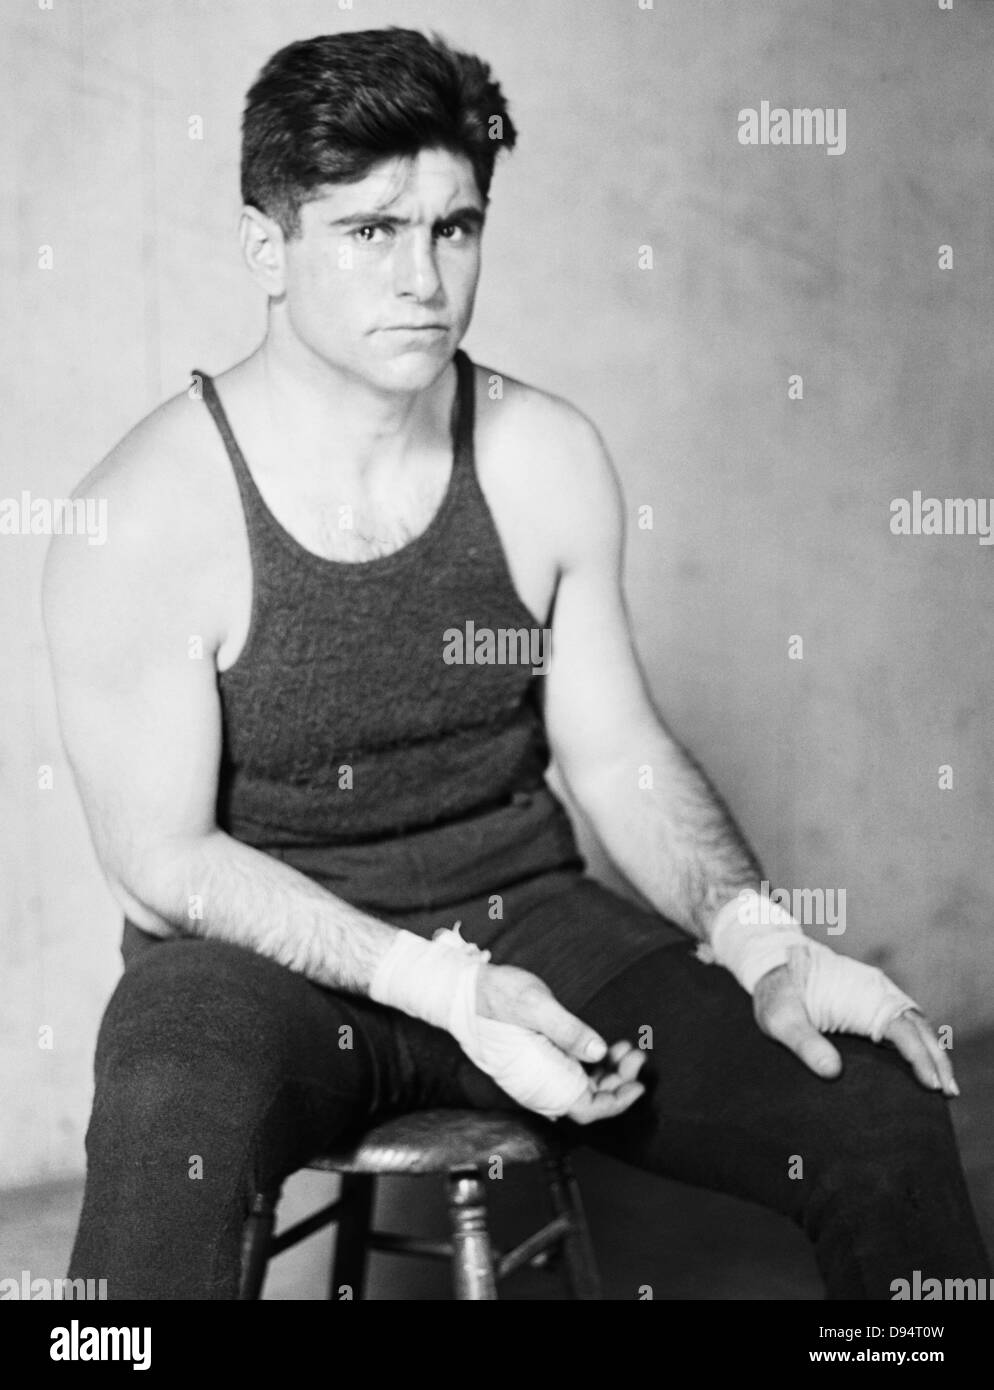 Vintage photo of Argentinian boxer Luis Angel Firpo (1894 – 1960). Firpo, known as “The Wild Bull of the Pampas”, famously challenged champion Jack Dempsey for the world heavyweight title in a dramatic slugfest in 1923 in which he knocked / pushed Dempsey out of the ring in the first round before getting knocked out by Dempsey in the second round. Stock Photo